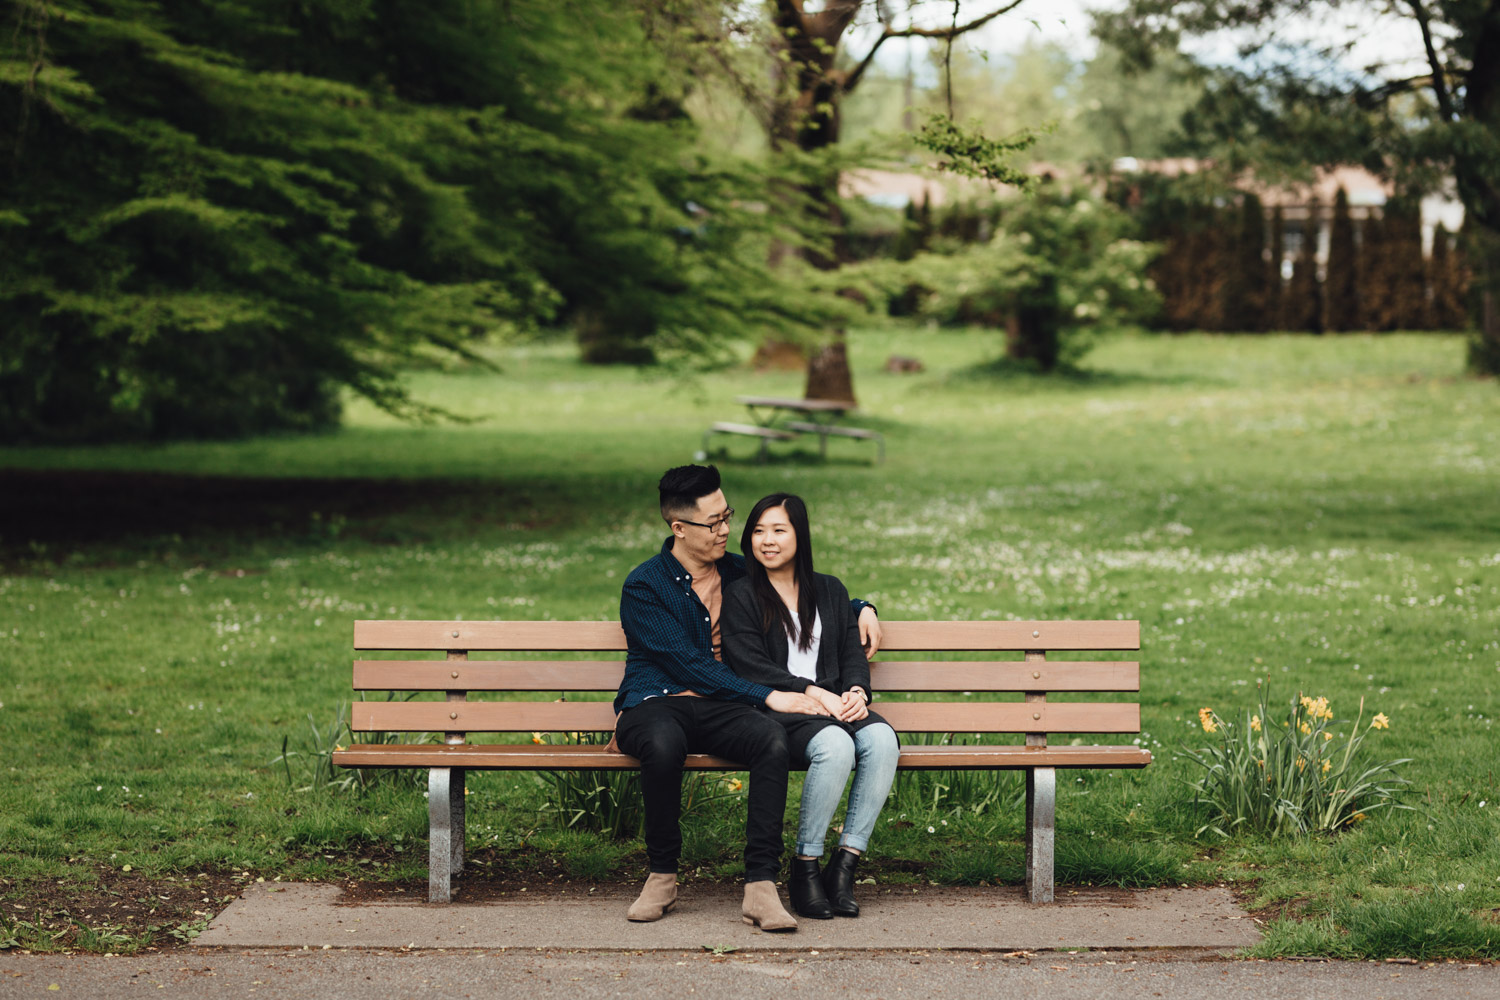 stanley park rose garden engagement photography bench sitting candid vancouver bc